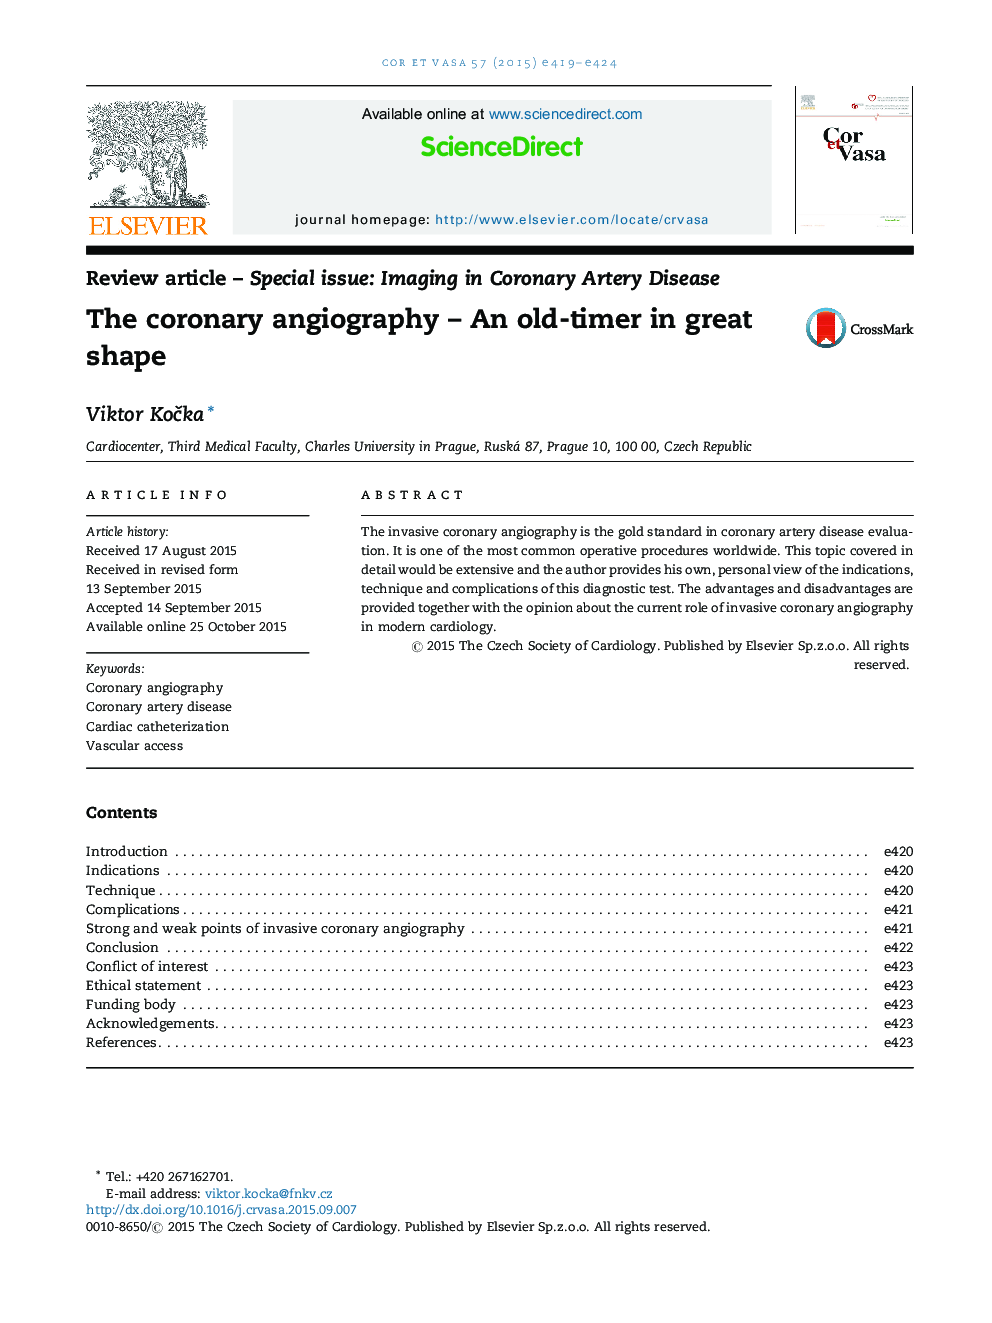 The coronary angiography – An old-timer in great shape